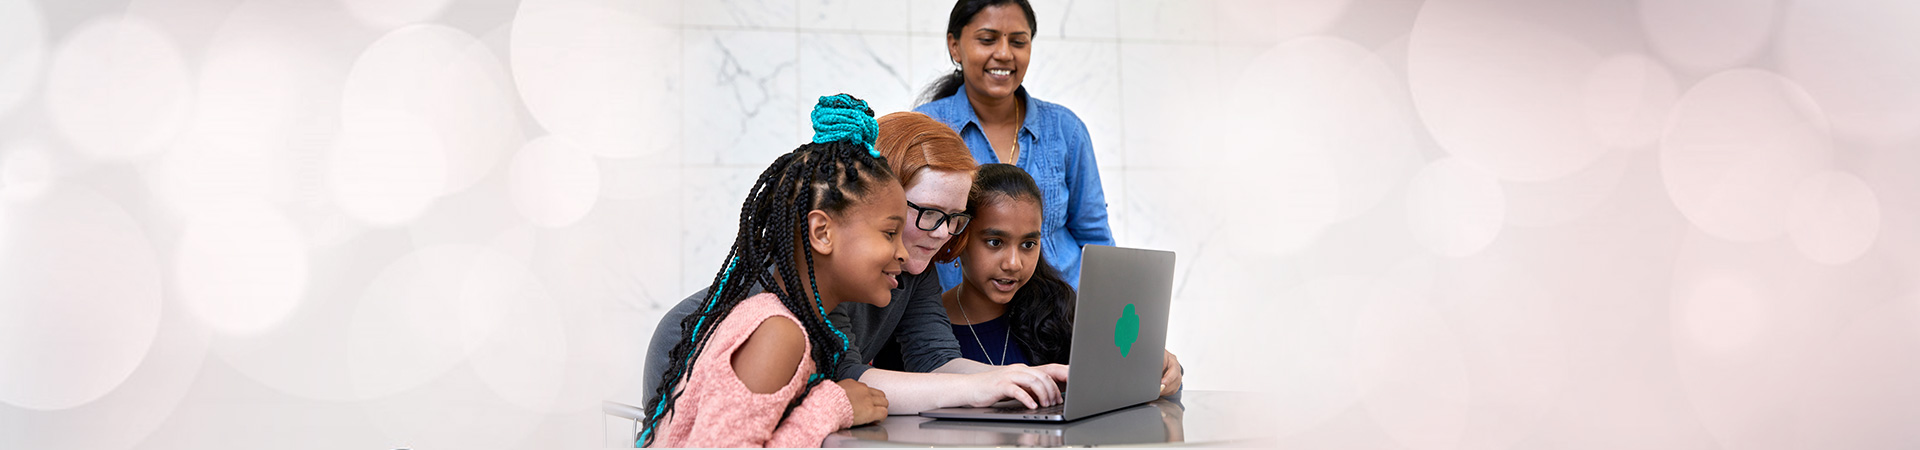  Girl Scouts and adult volunteer looking at computer 